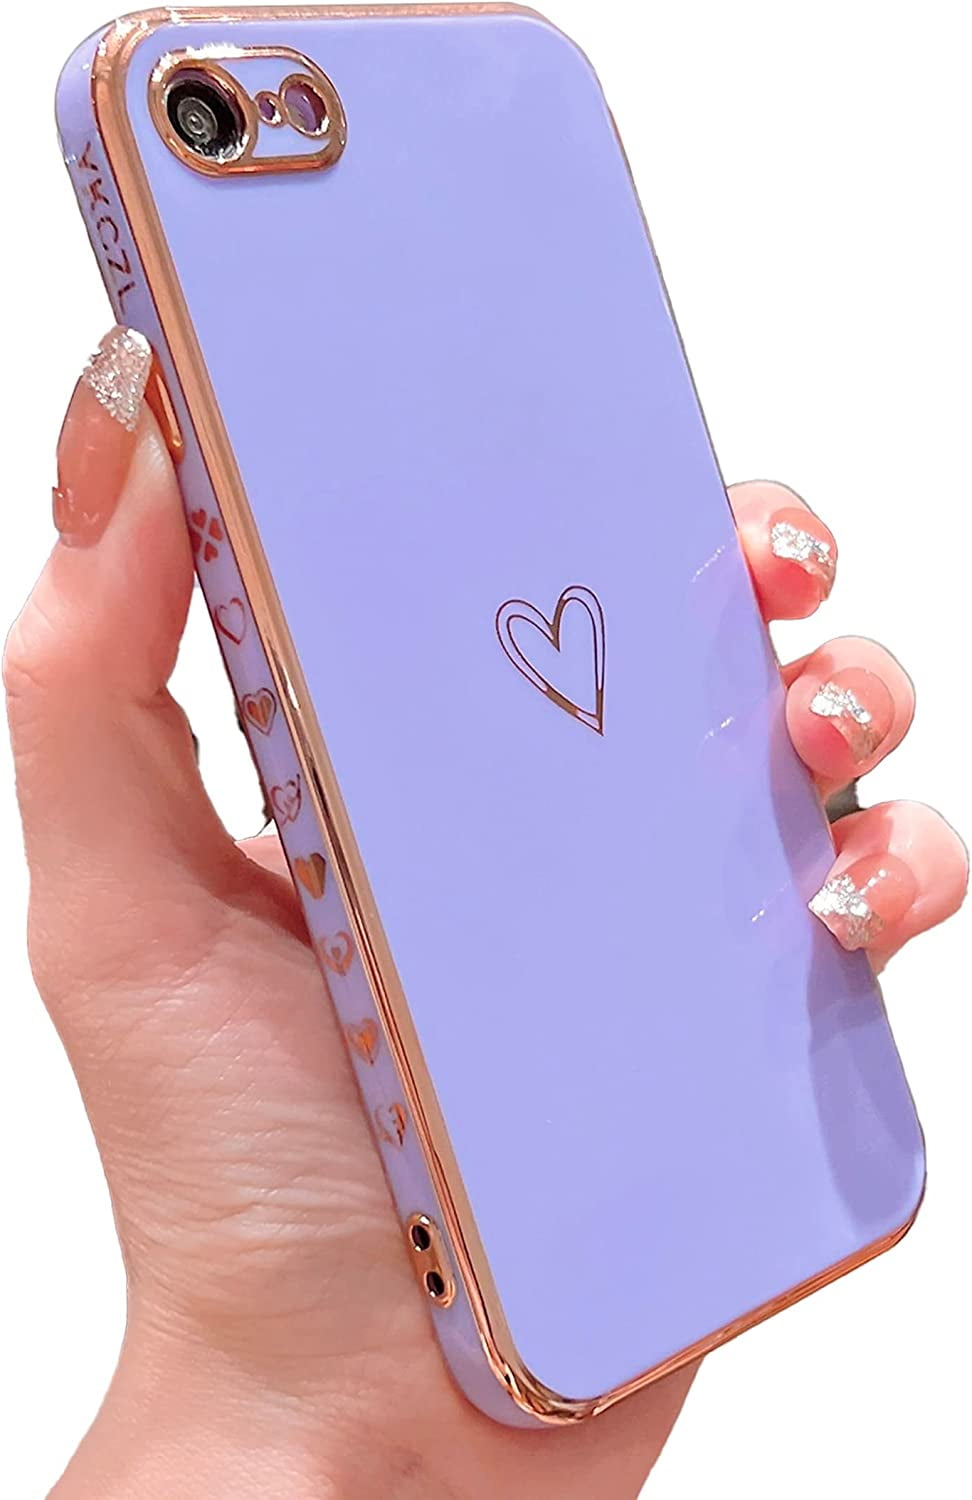 For iPhone SE 2020 Case Fashion Girls Silicone Soft Cover Bumper for iPhone  7 8 6 6s plus iphonese 2 se2020 se 2020 Phone Case - AliExpress